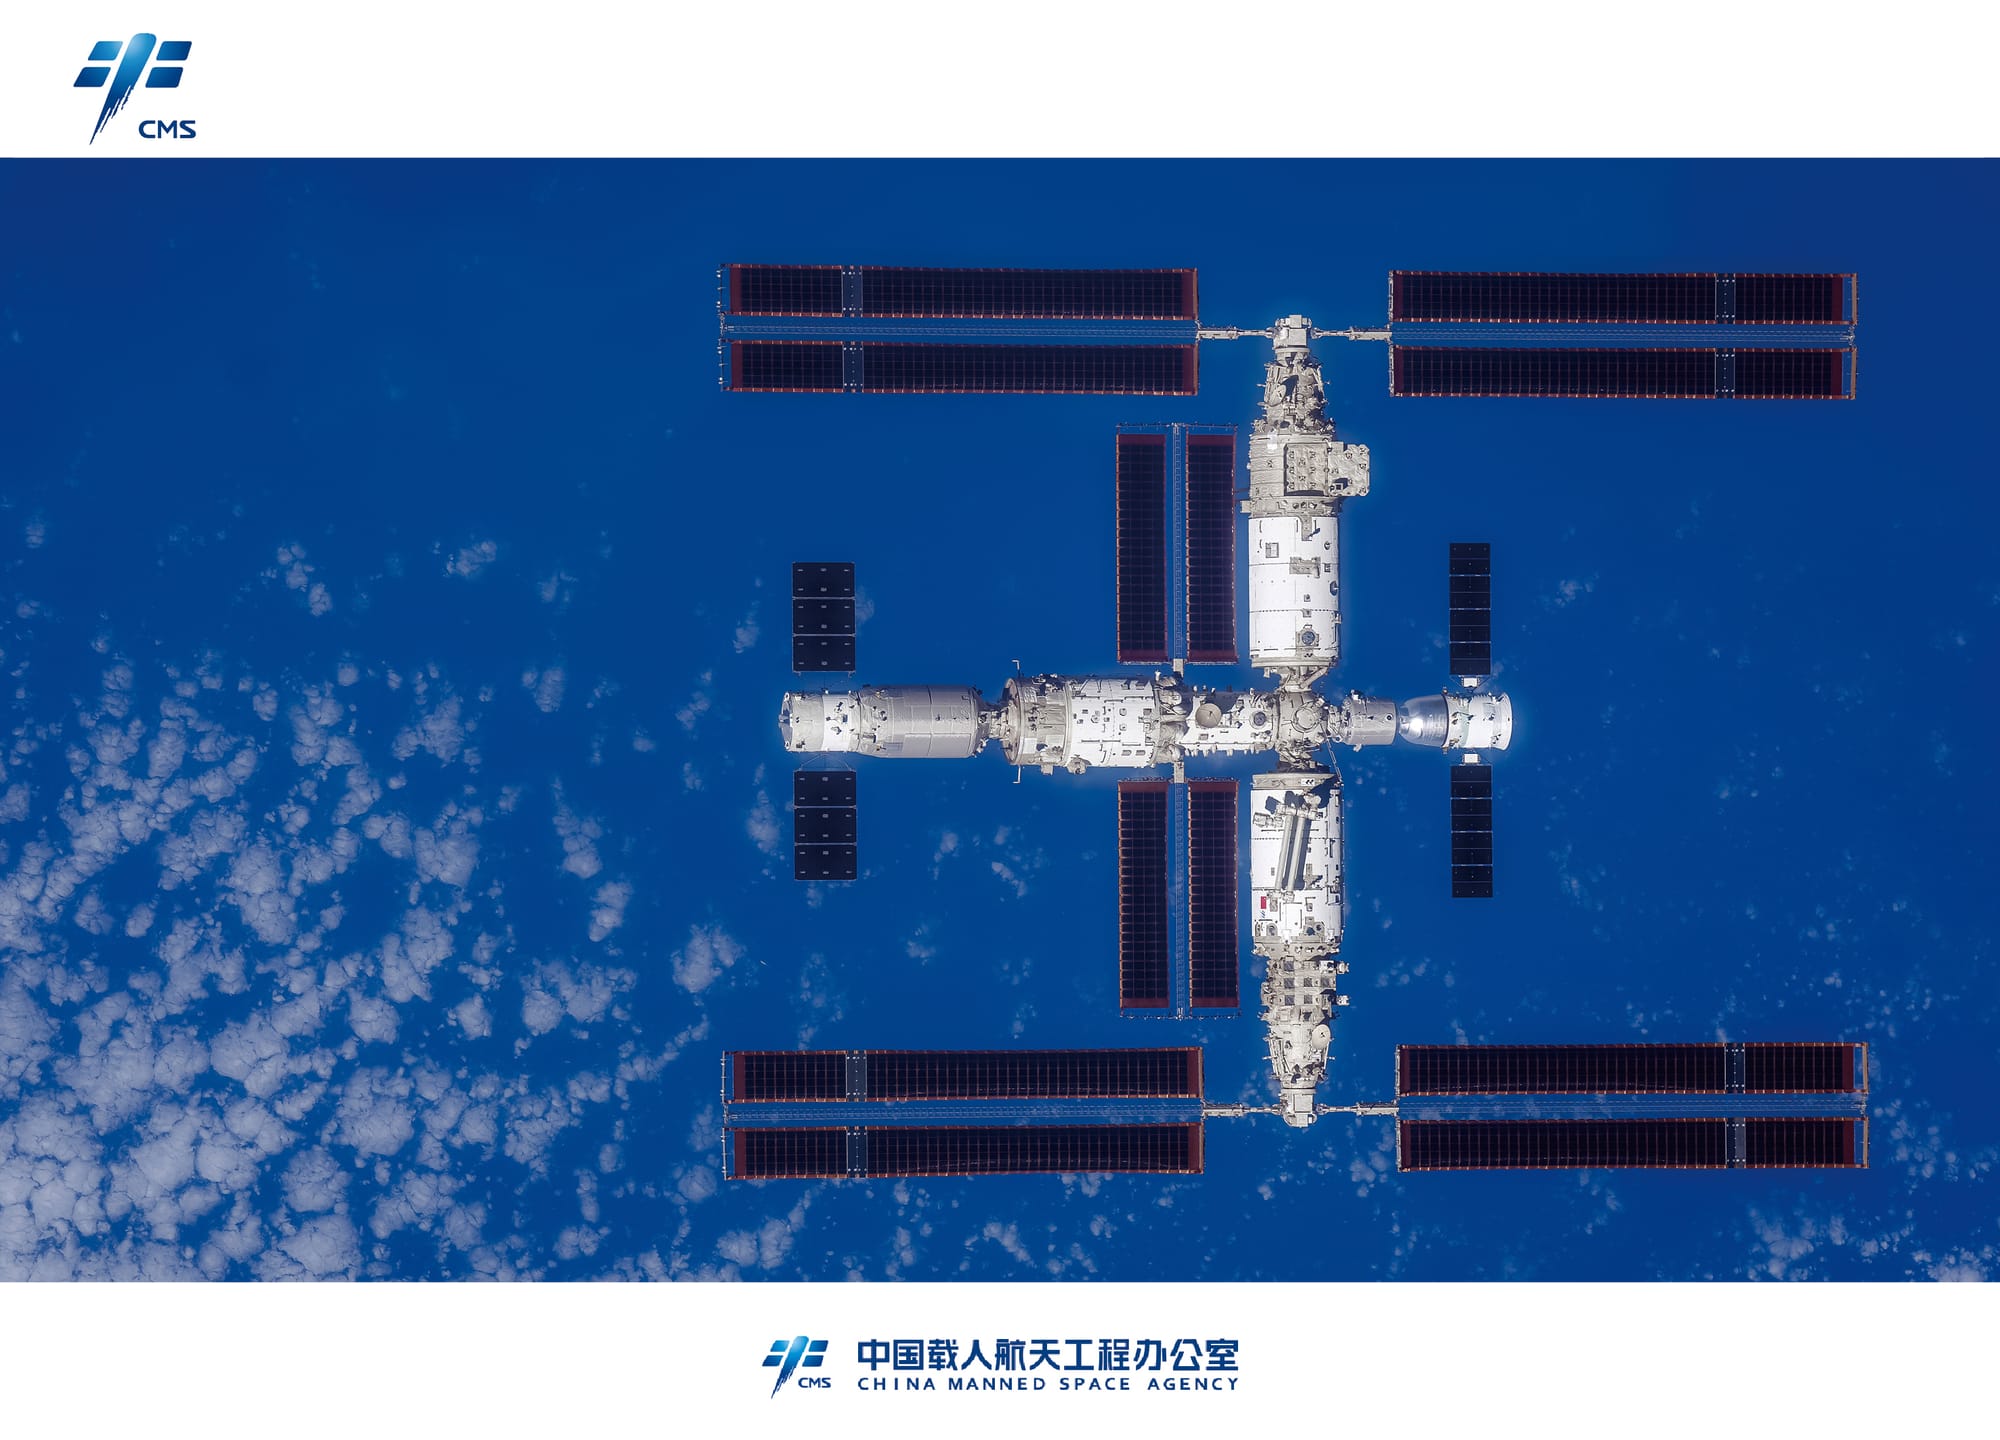 The Tiangong Space Station, with Earth in the background, with Shenzhou 17 and Tianzhou 6 docked, as seen by Shenzhou 16 during departure. ©China Manned Space Agency